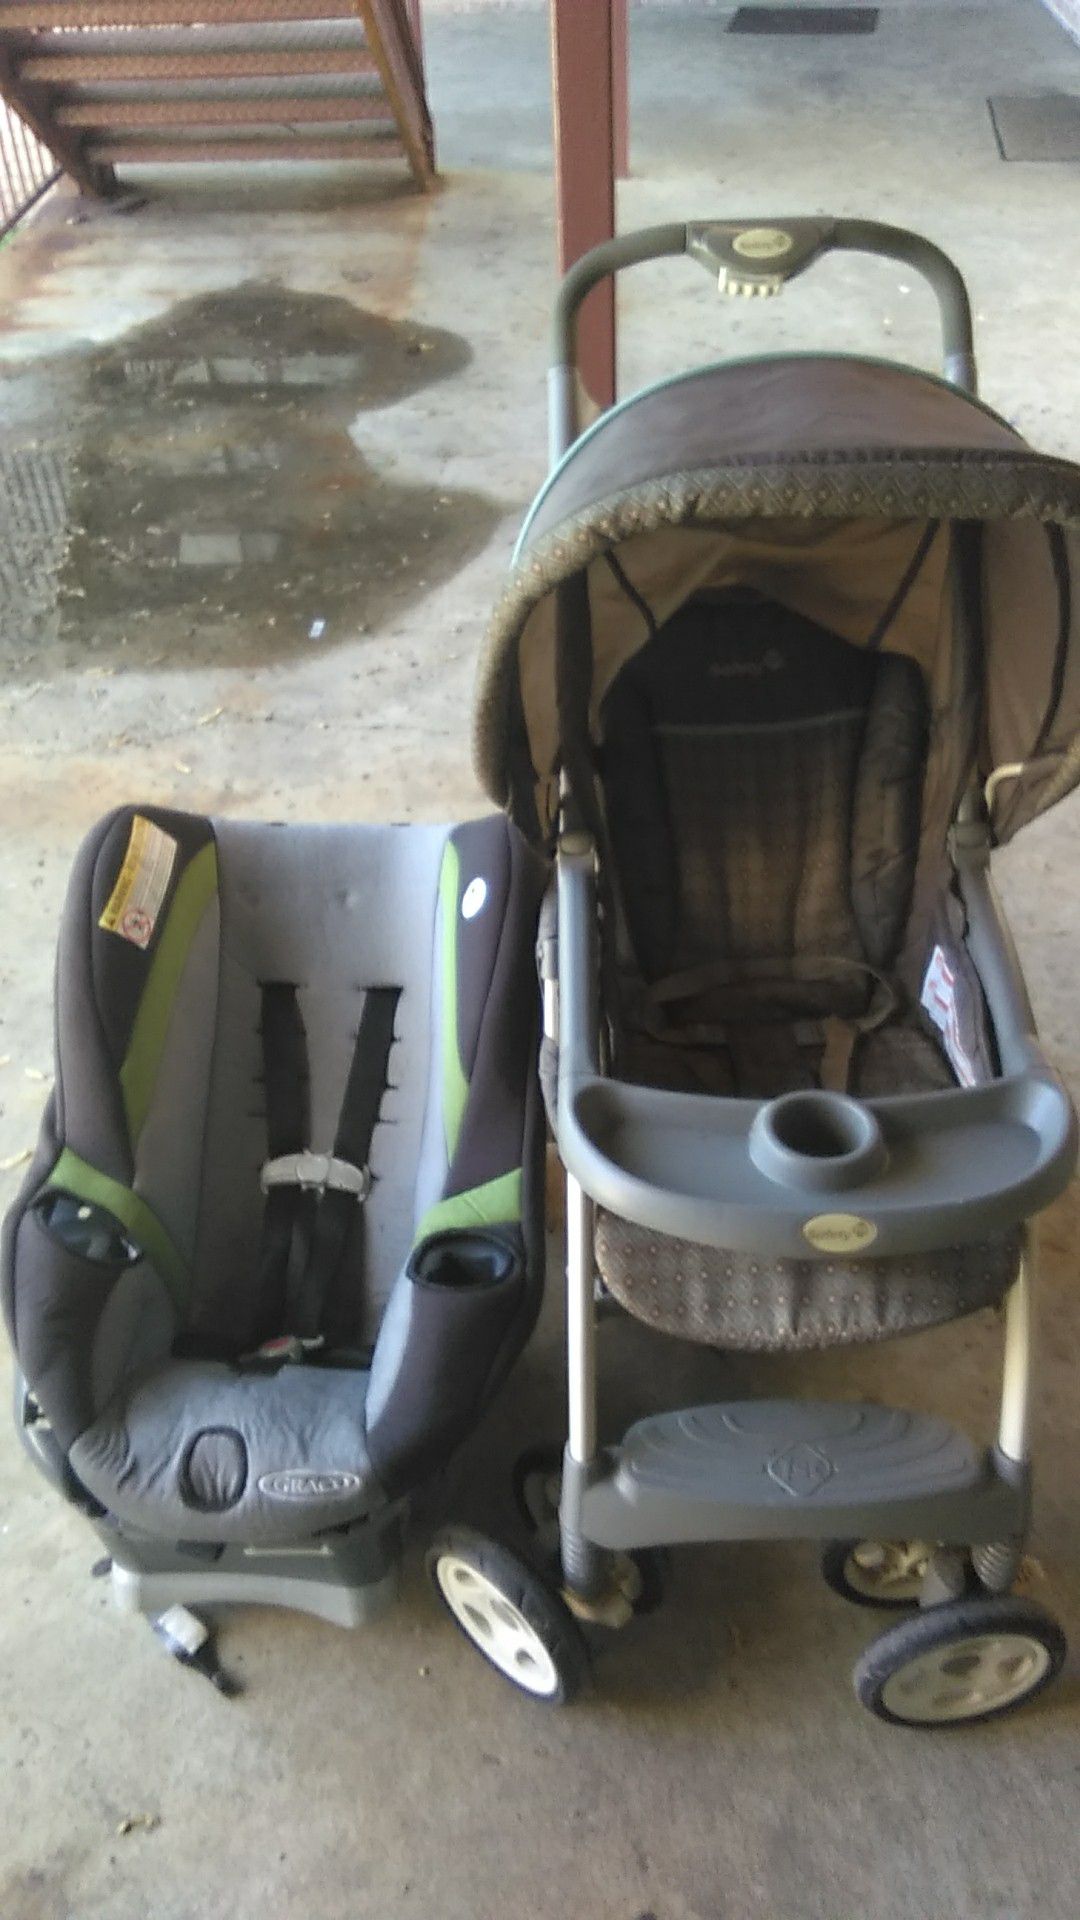 Graco child car seat with 2 cup holders and a safety first child stroller